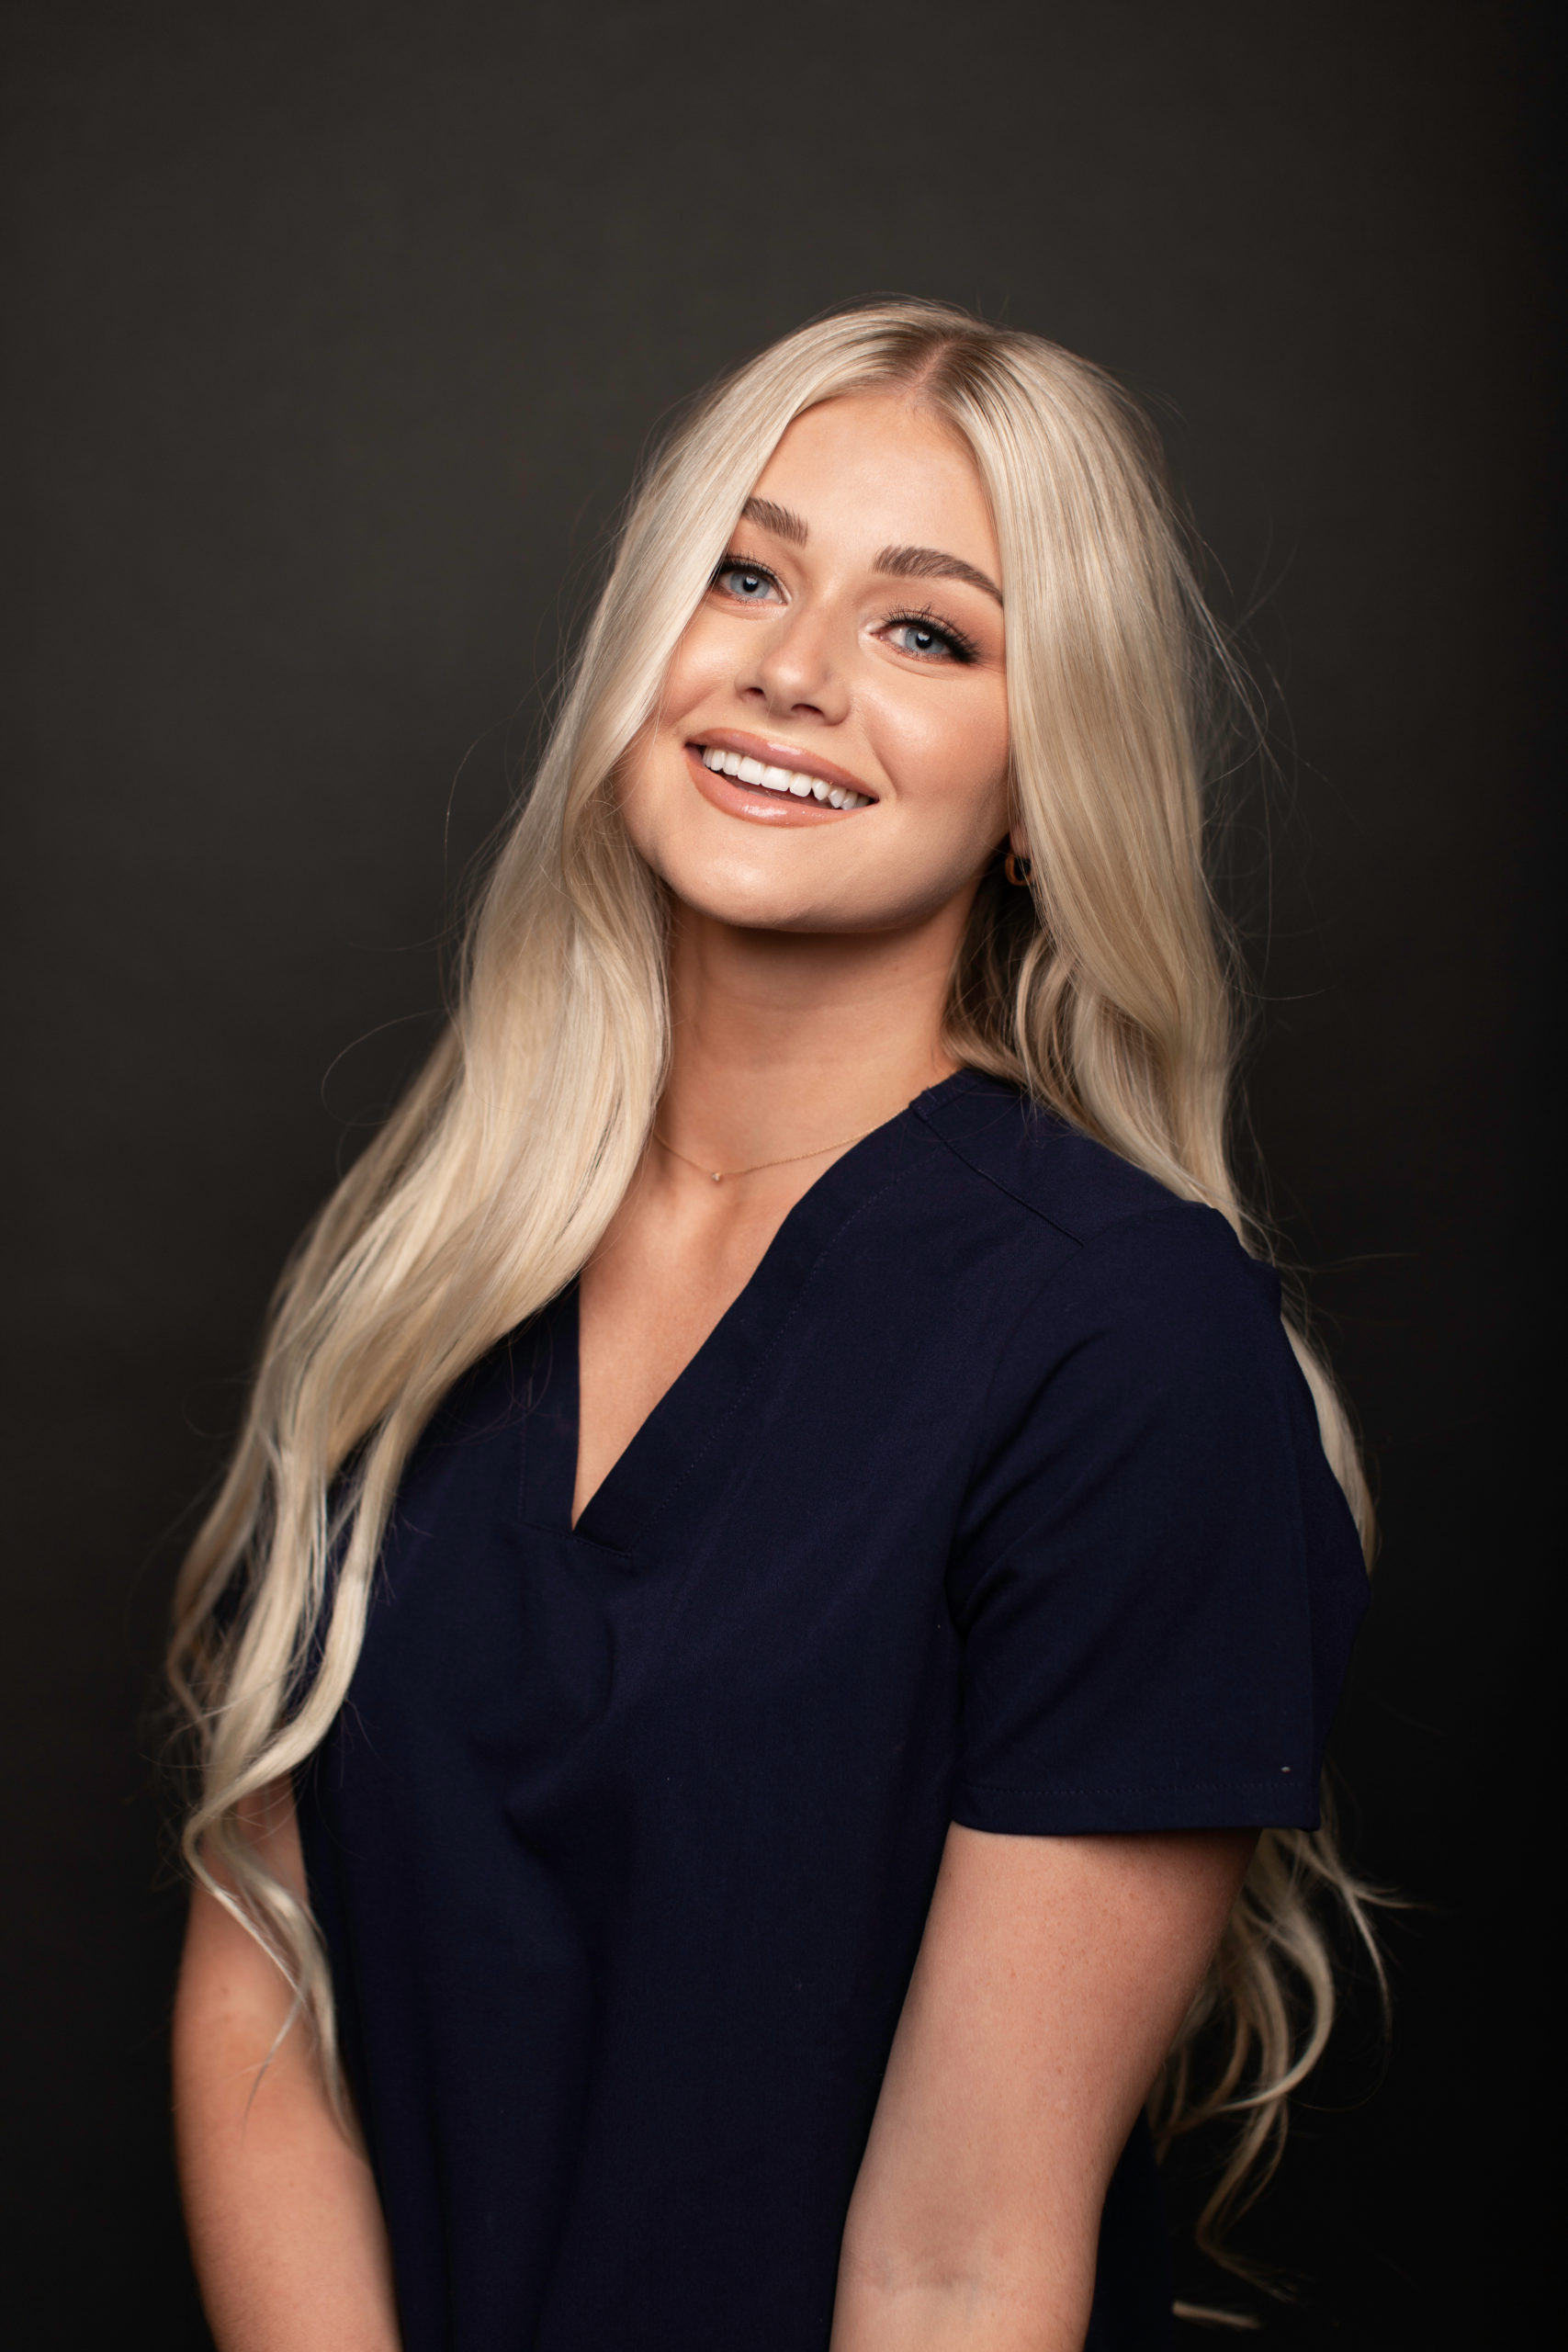 Brynley Arnold who is a young blonde Nurse in scrubs who is a Utah Injections Instructor